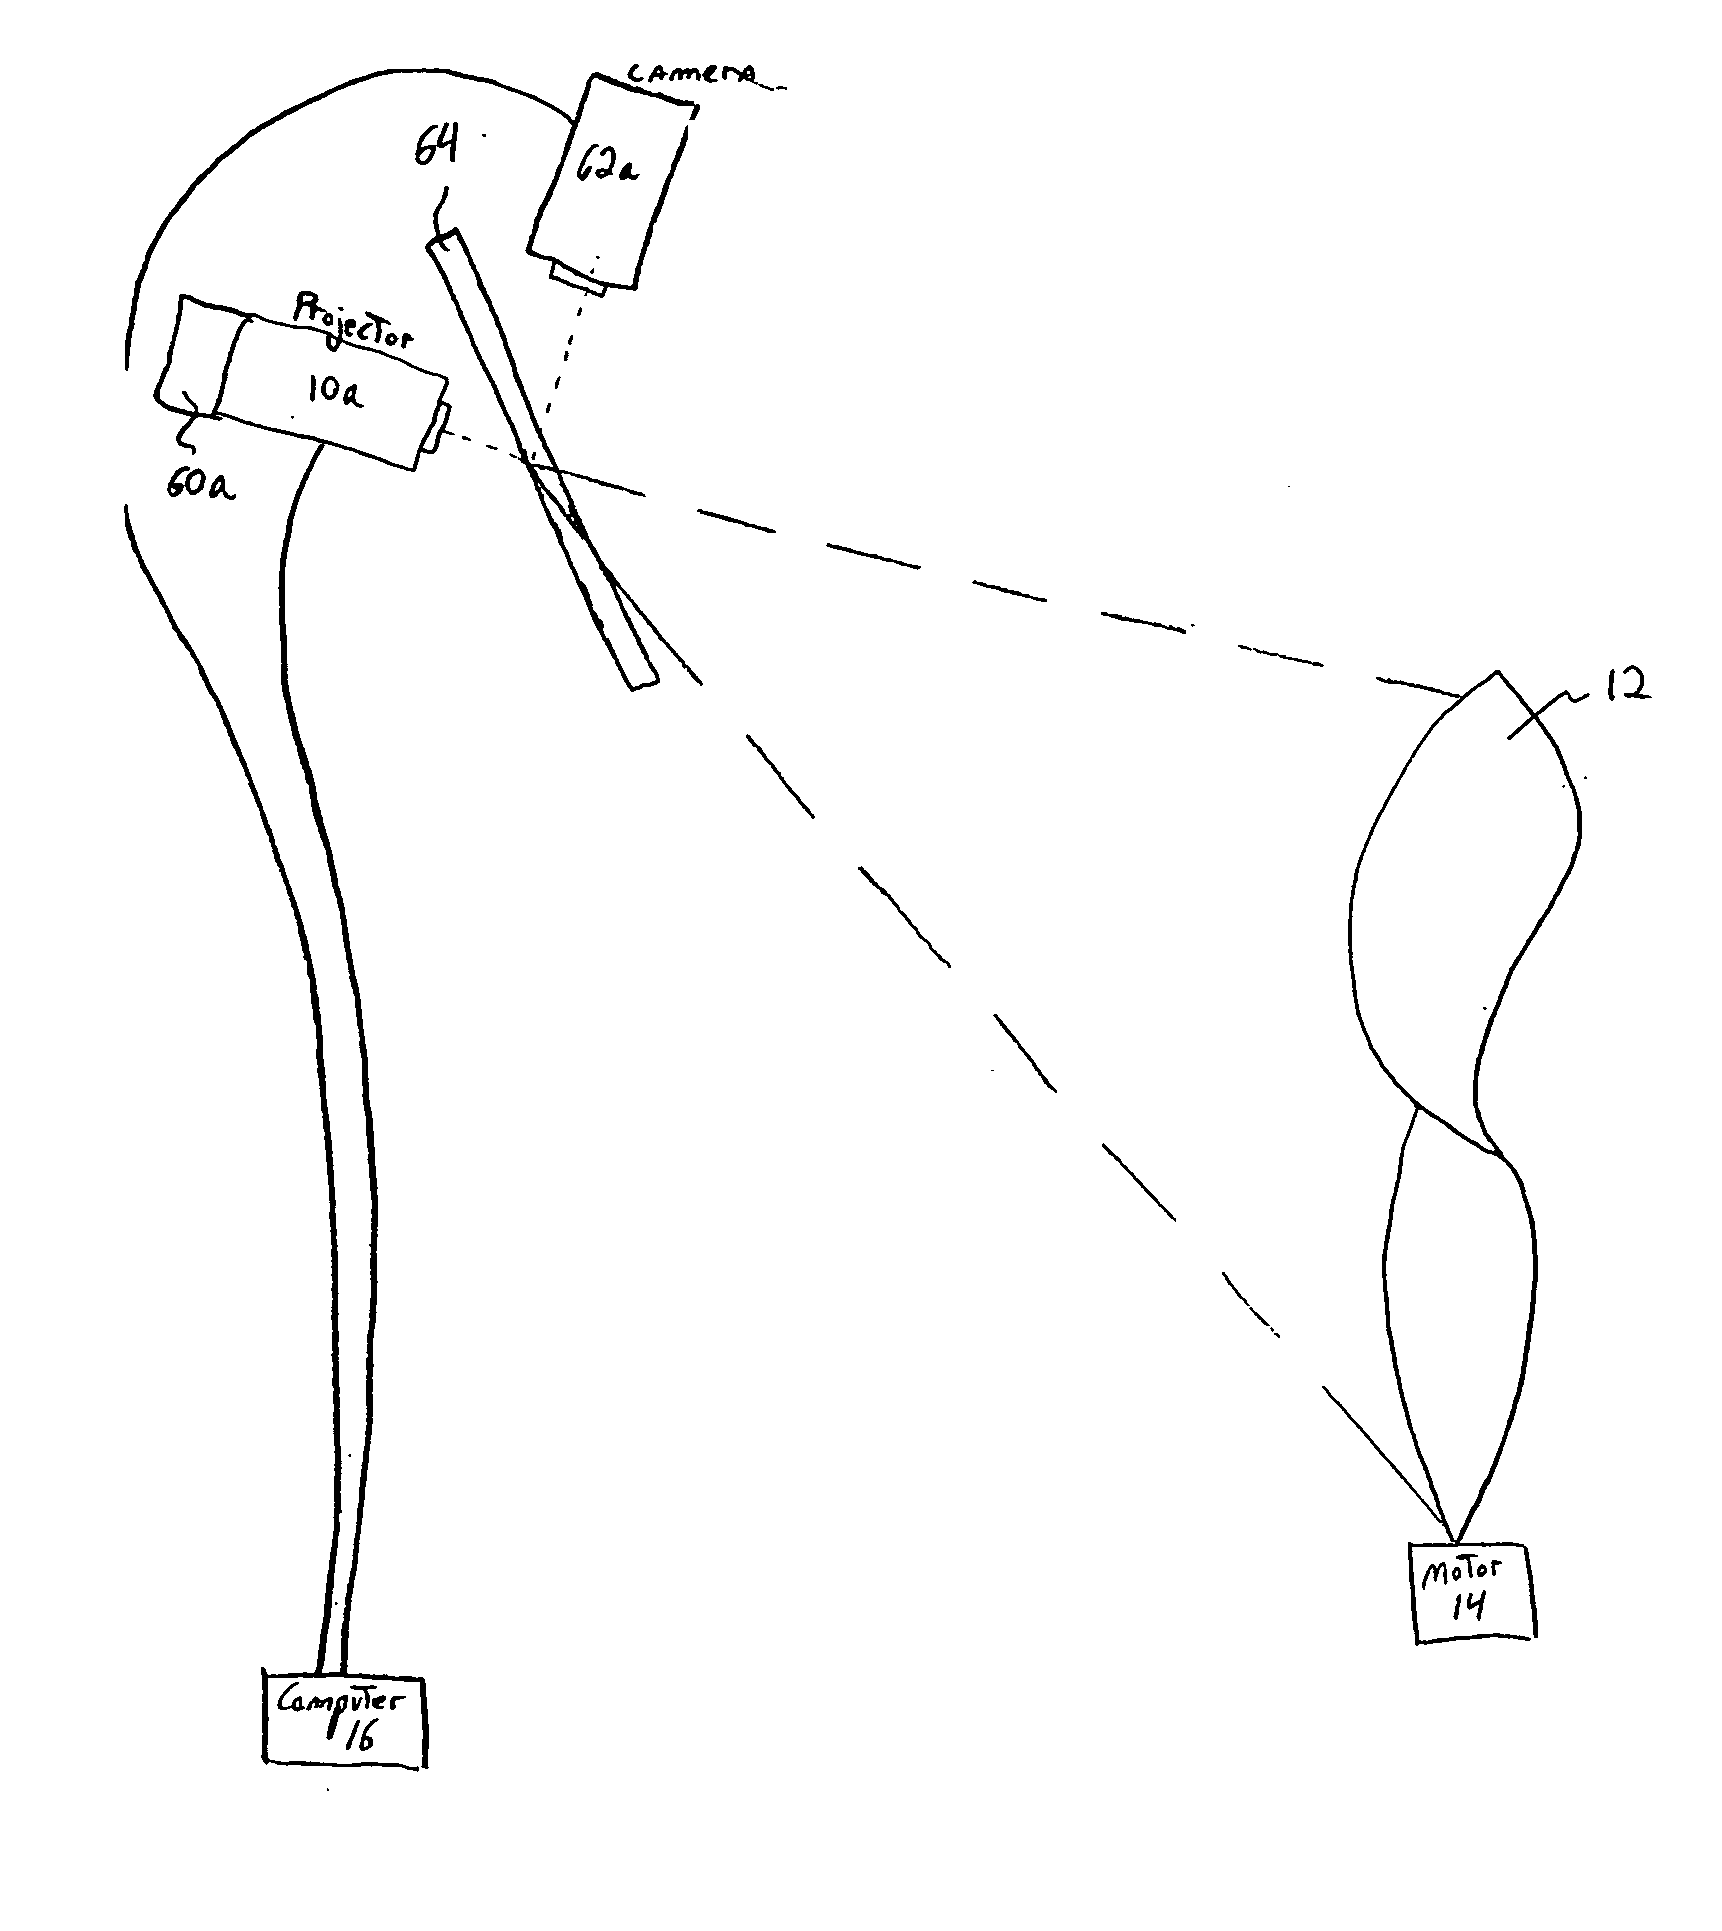 System and method for projecting images onto a moving screen